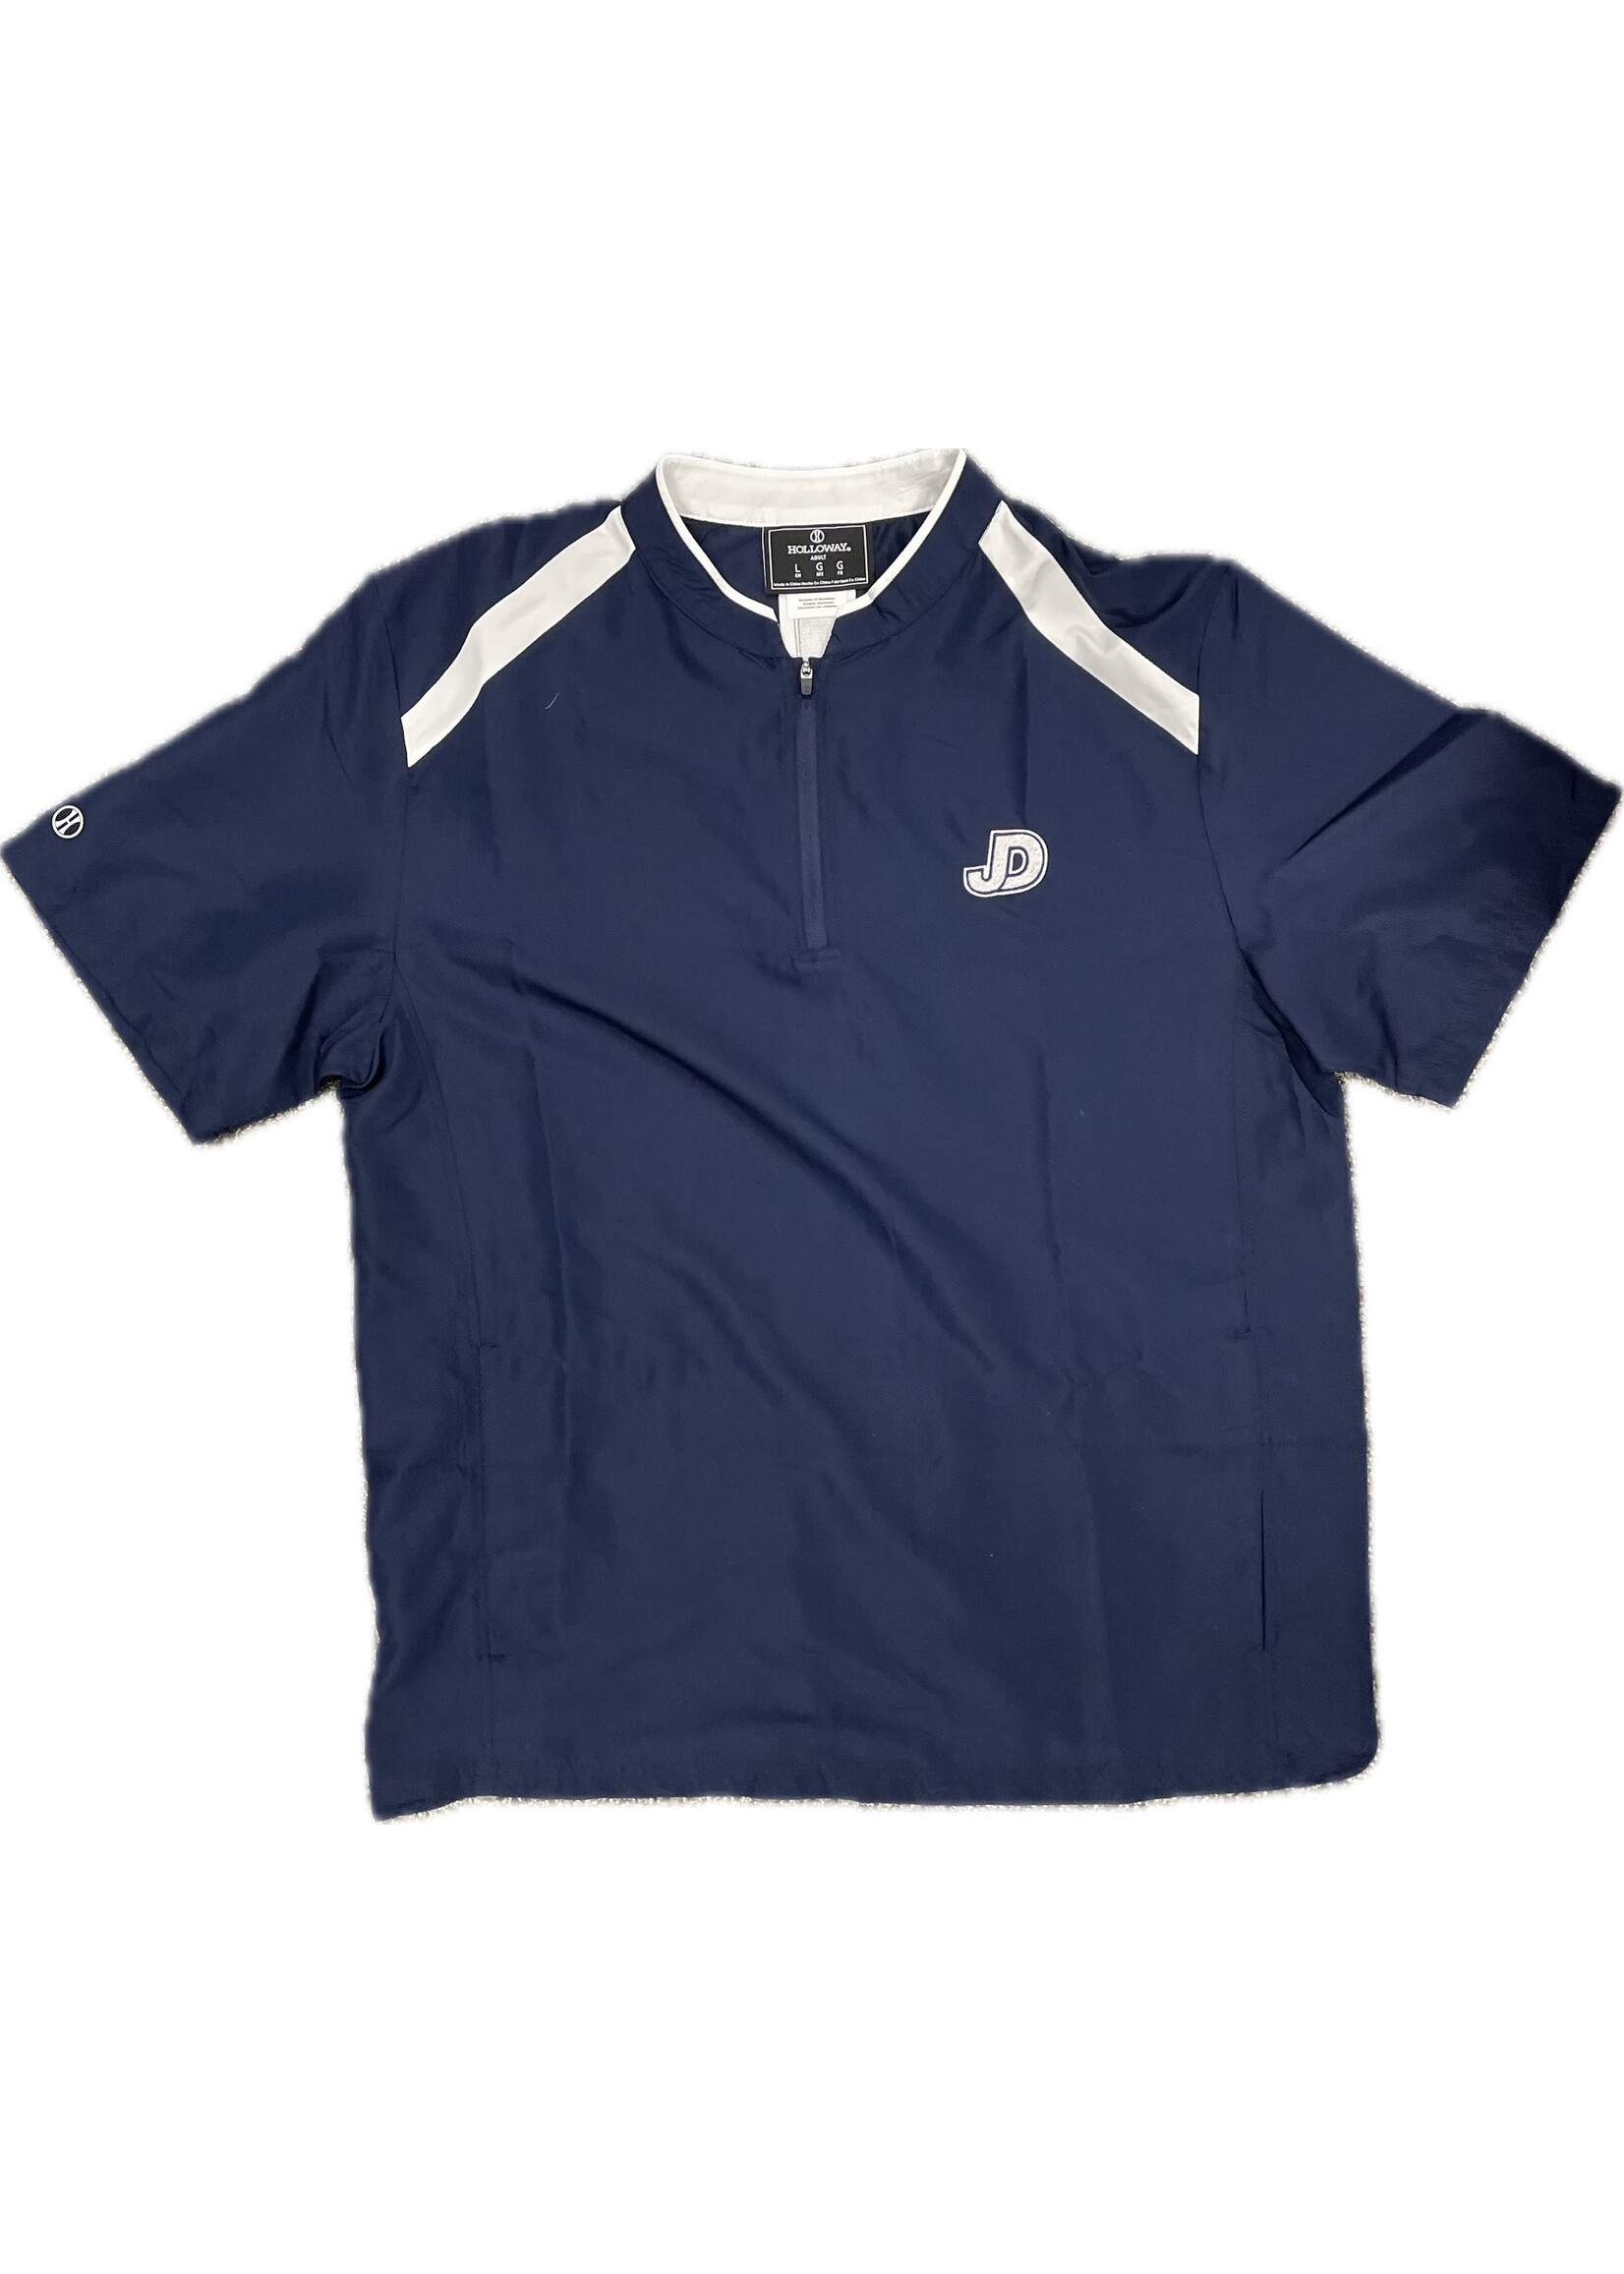 JD Clubhouse Short Sleeve 1/4 Zip Pullover